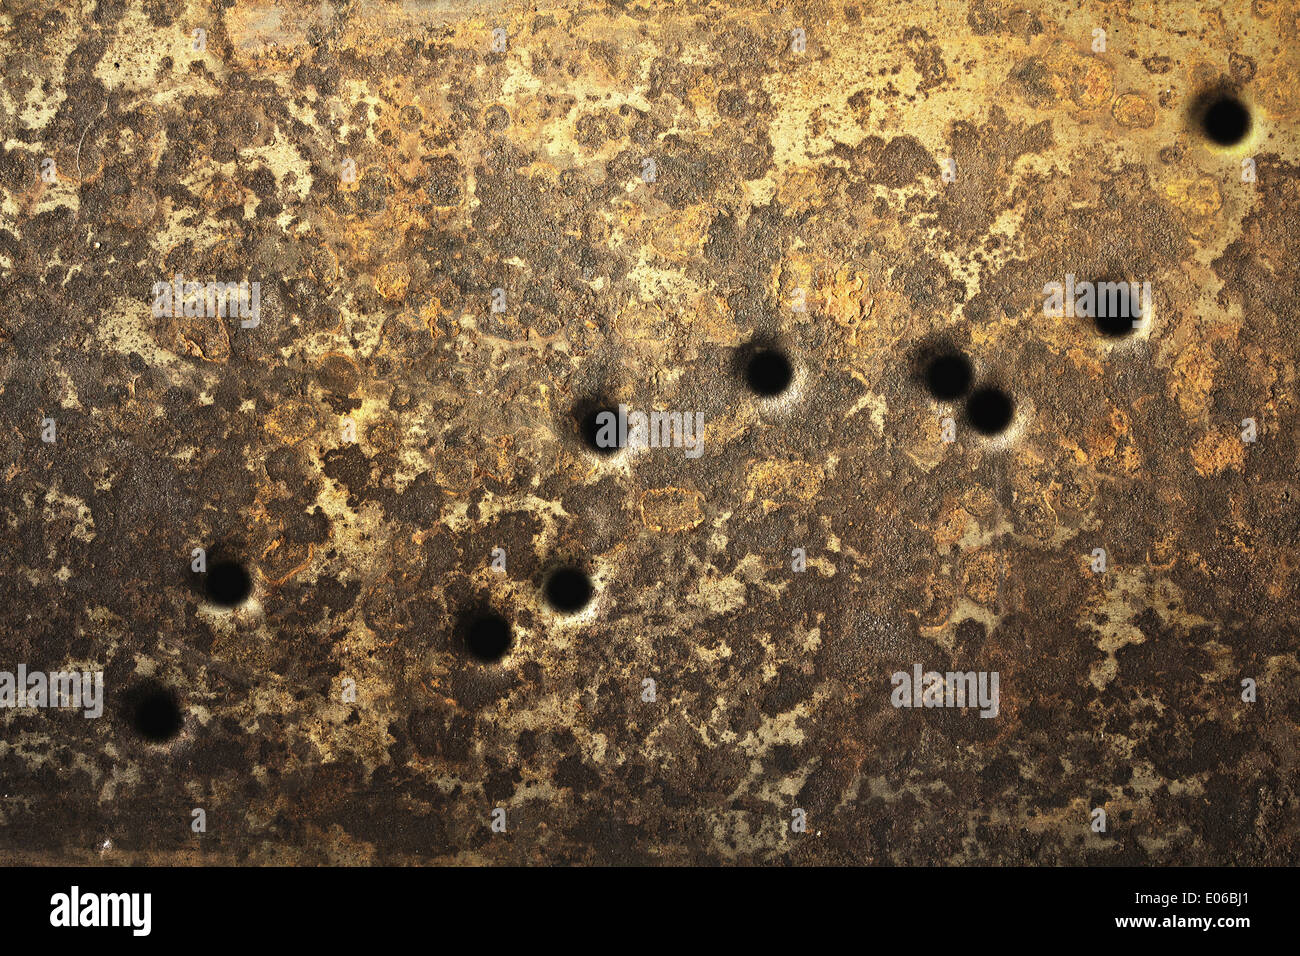 Rusty metallic surfaces perforated with bullet holes. Stock Photo